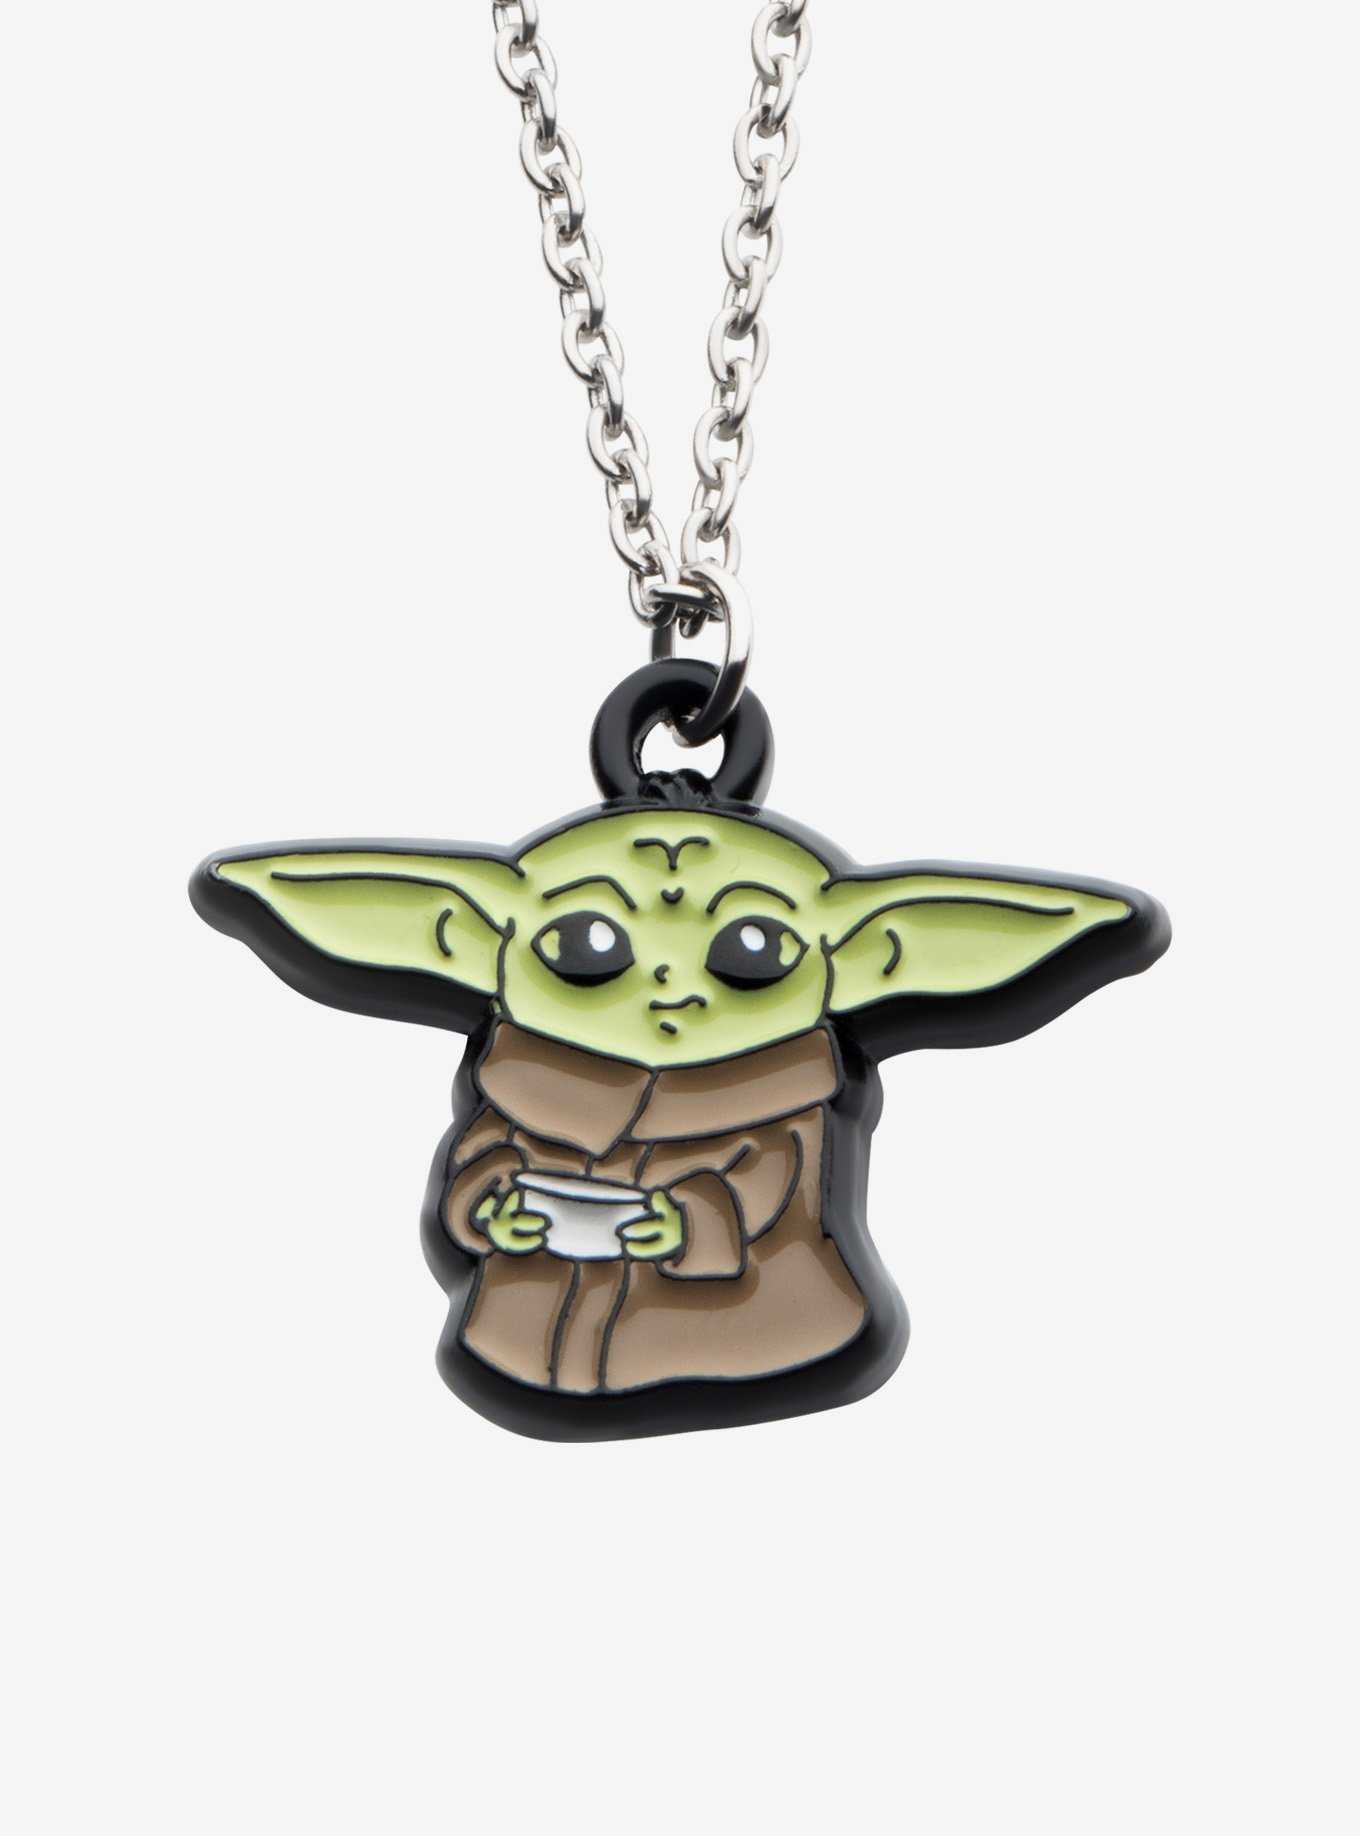 Star Wars: The Mandalorian Grogu with Cup Pendant Necklace, , hi-res